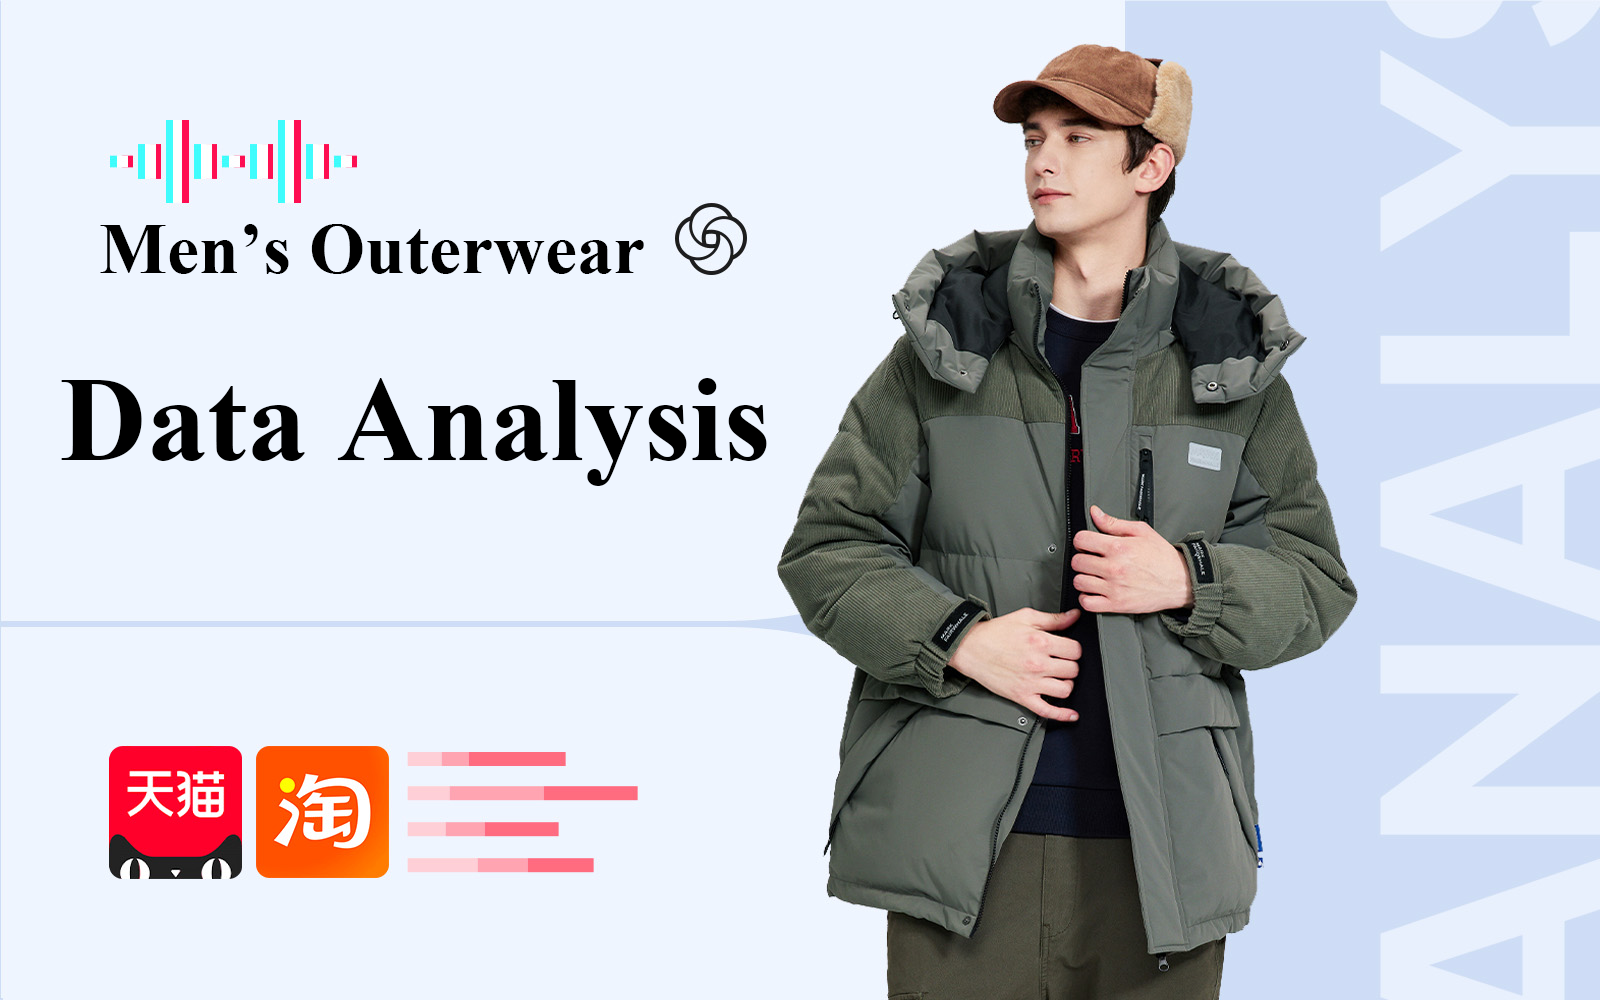 Outerwear -- The Data Analysis of Menswear E-Commerce